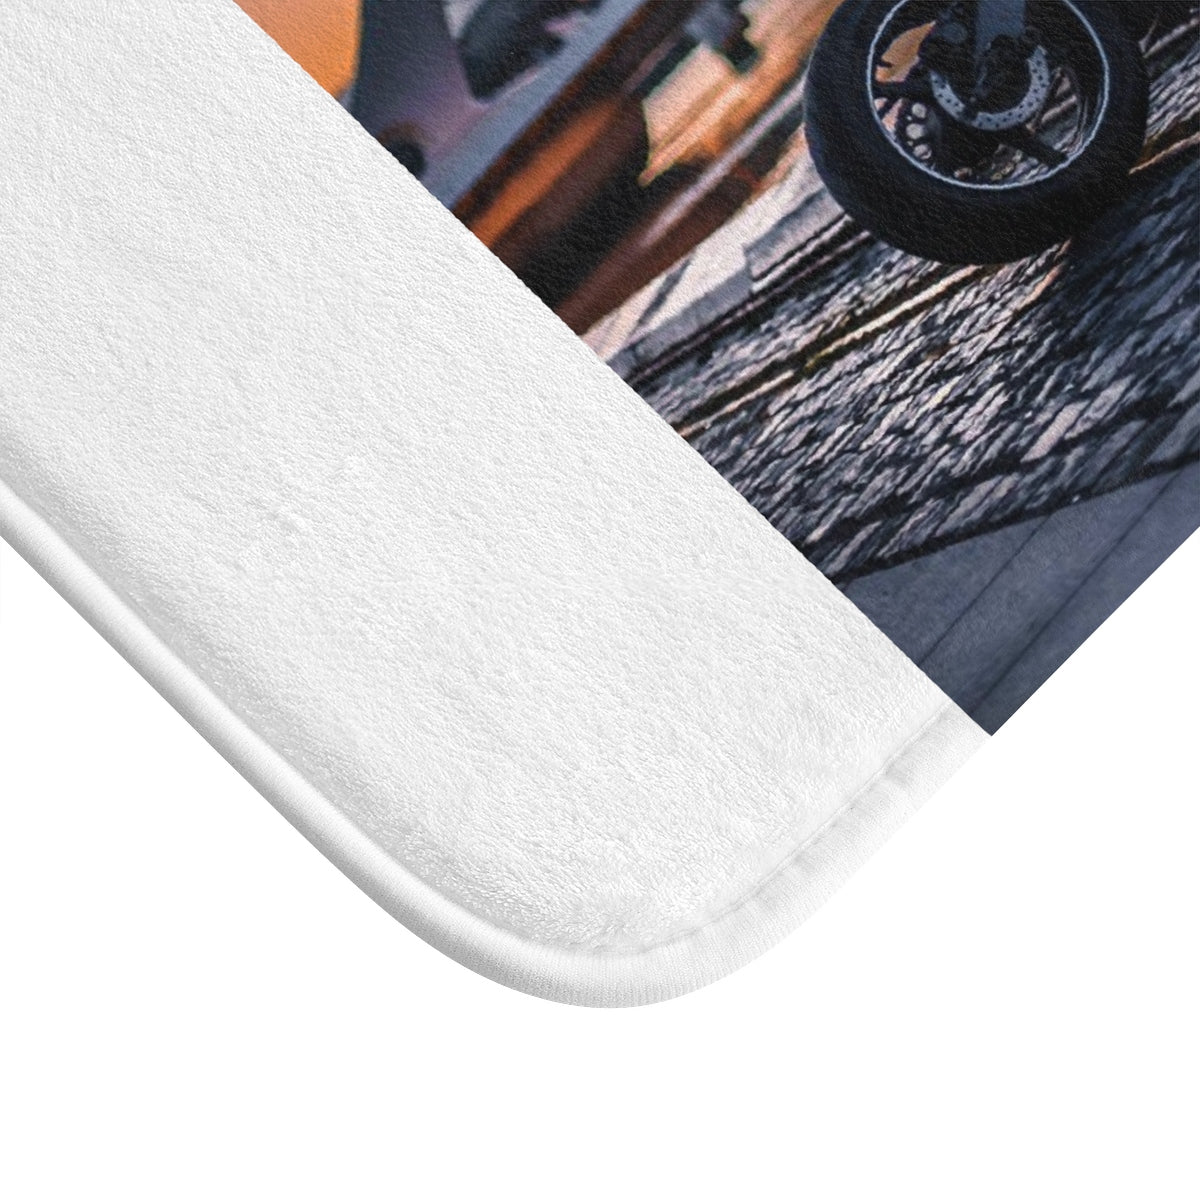 Five Toes Down Motorcycle Bath Mat